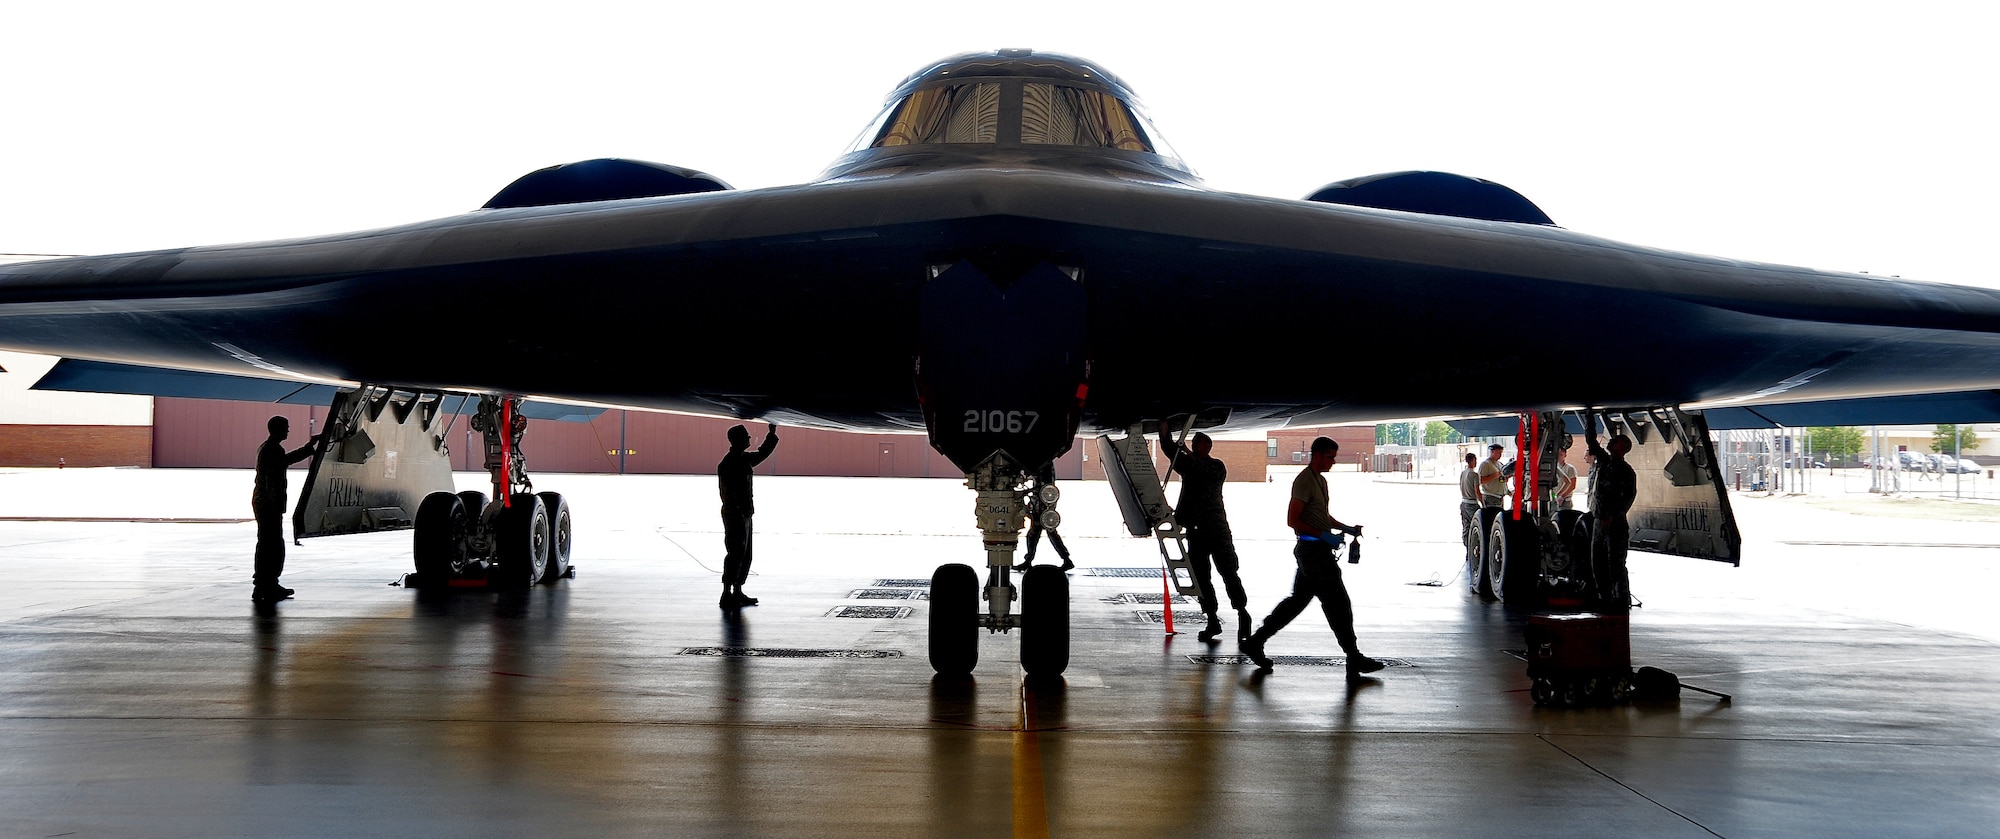 WHITEMAN AIR FORCE BASE, Mo. -- Crew chiefs from the 509th Aircraft Maintenance Squadron and 131st Bomb Wing perform a phase inspection on a B-2 Spirit July 12. Every 1000 flight hours the B-2 must be "phased" in search of any discrepancies that could cause major damage. (U.S. Air Force photo/Senior Airman Nick Wilson)